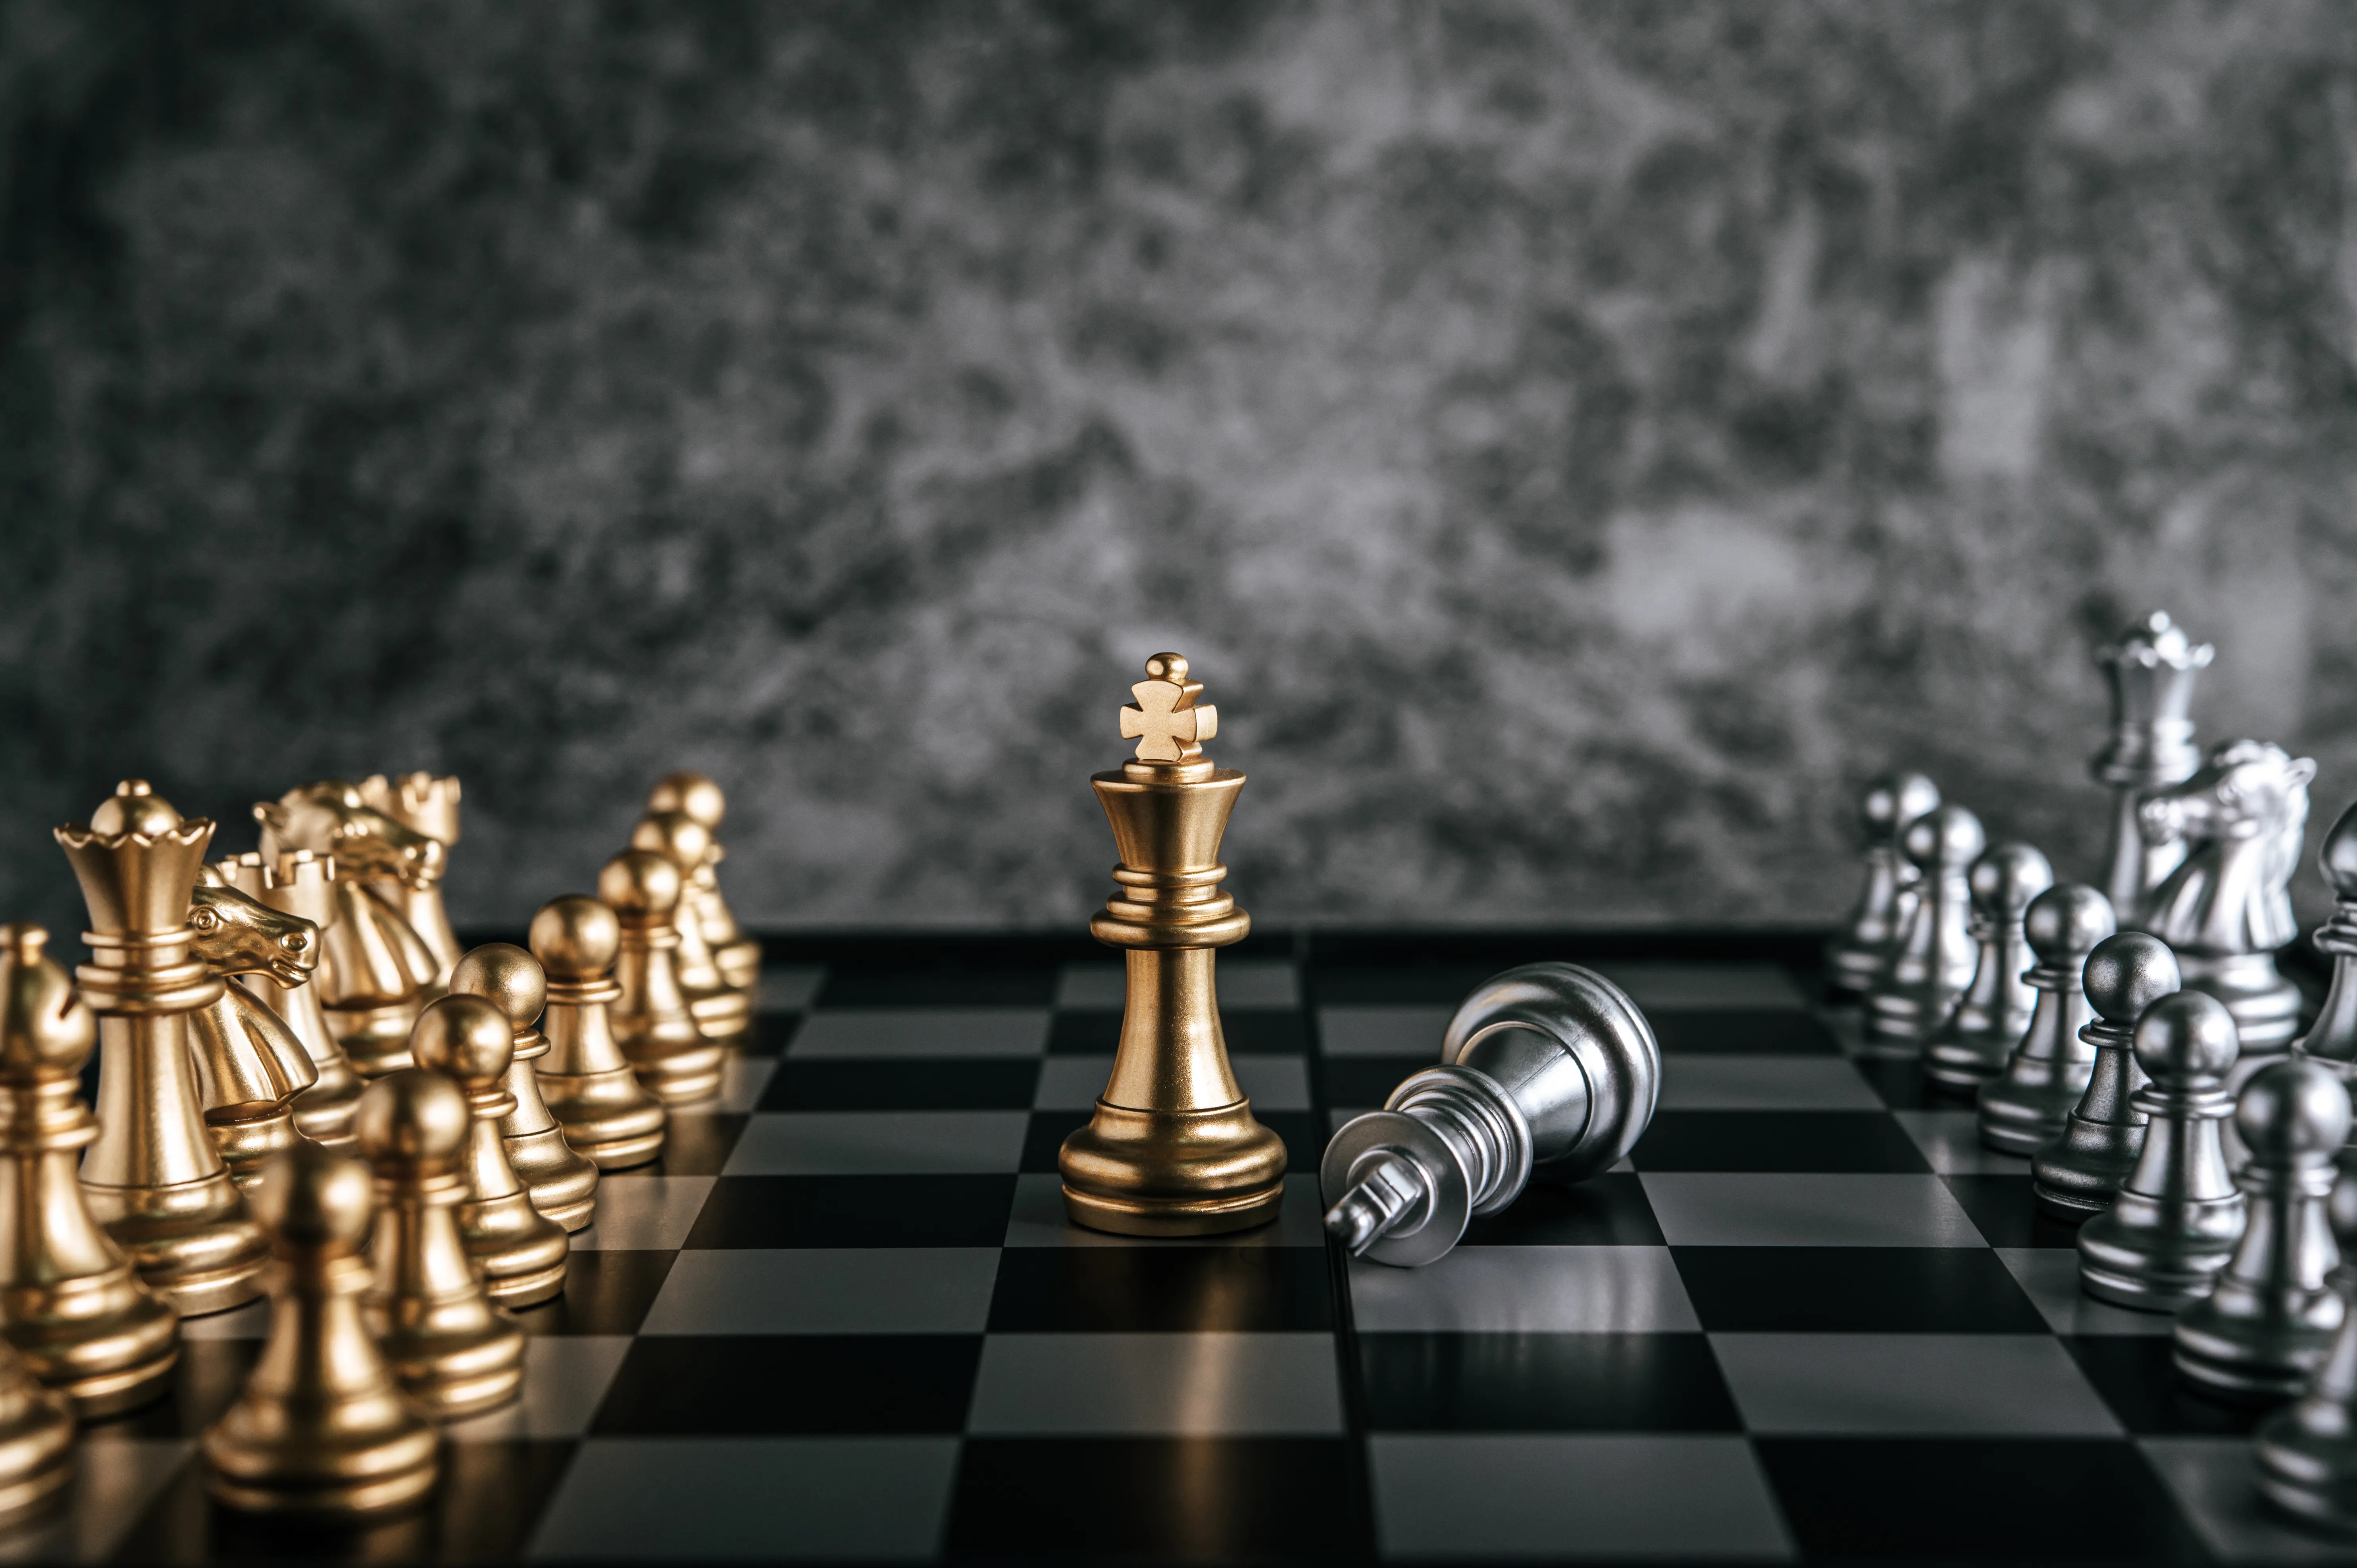 gold-silver-chess-chess-board-game-business-metaphor-leadership-concept